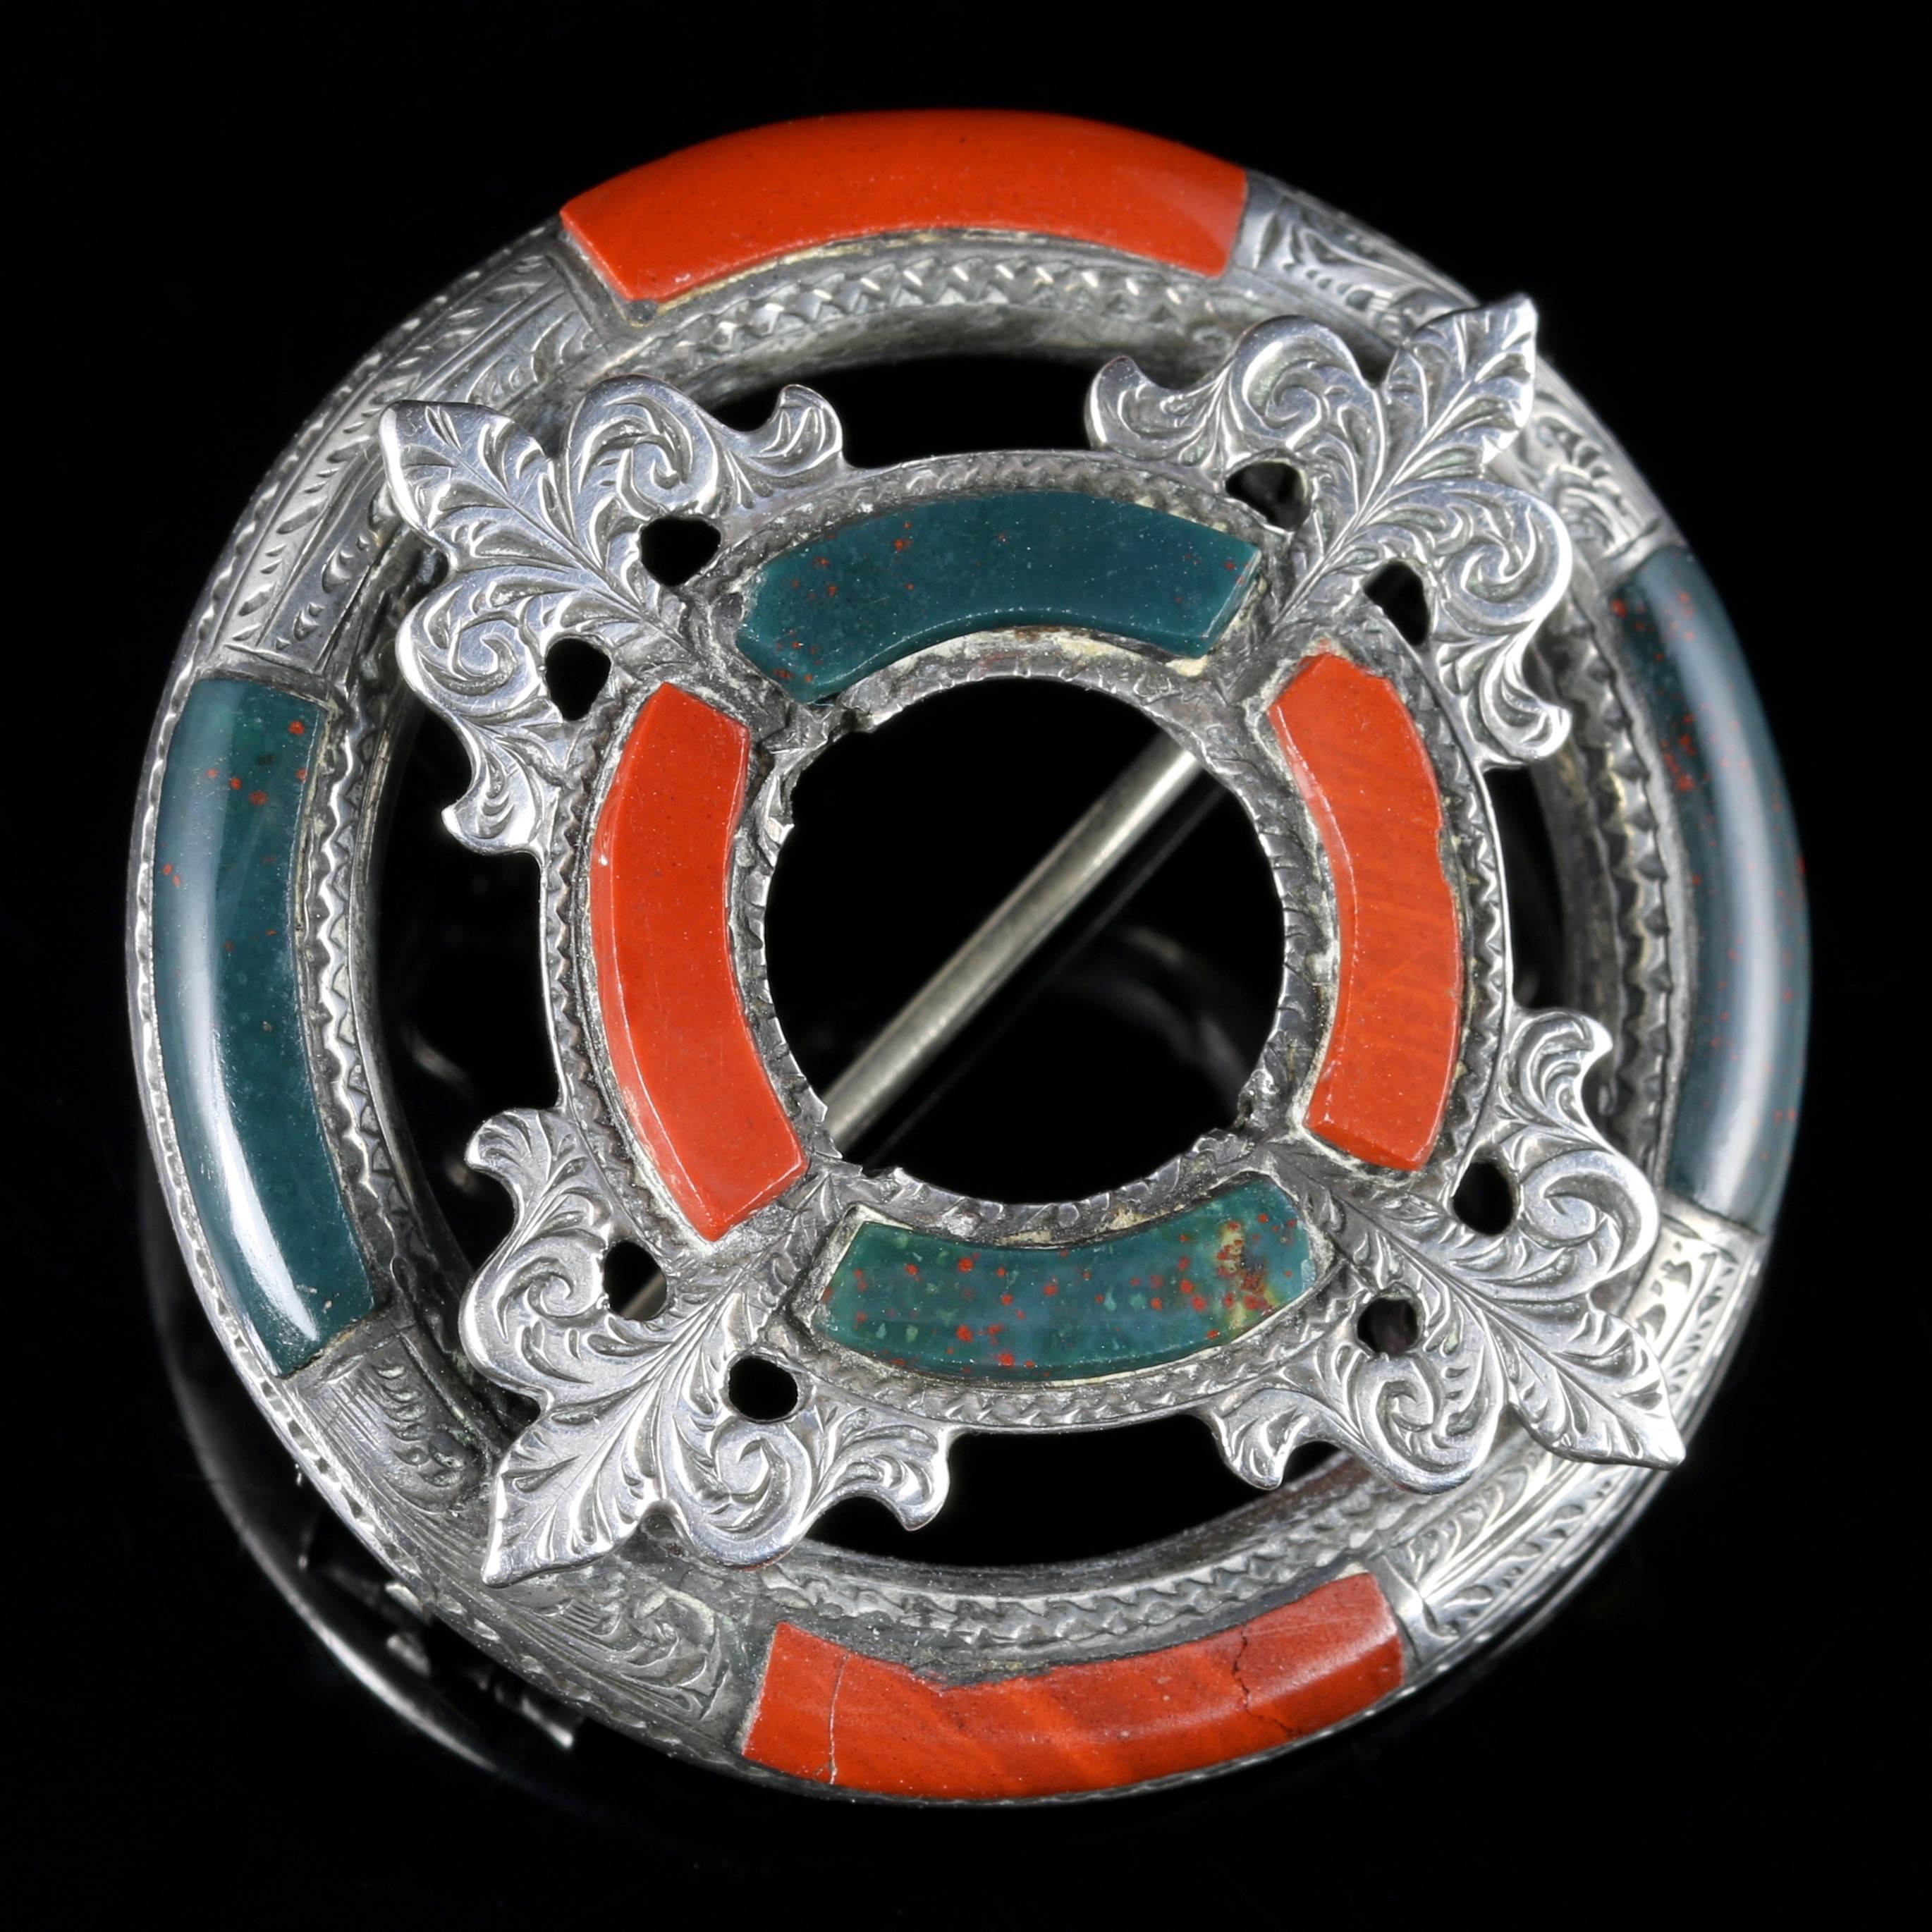 For more details please click continue reading down below...

This is a fabulous Sterling Silver Scottish Agate brooch.

Set with beautiful all round Scottish workmanship, deep engraving, and lovely polished natural Agates.

The brooch displays